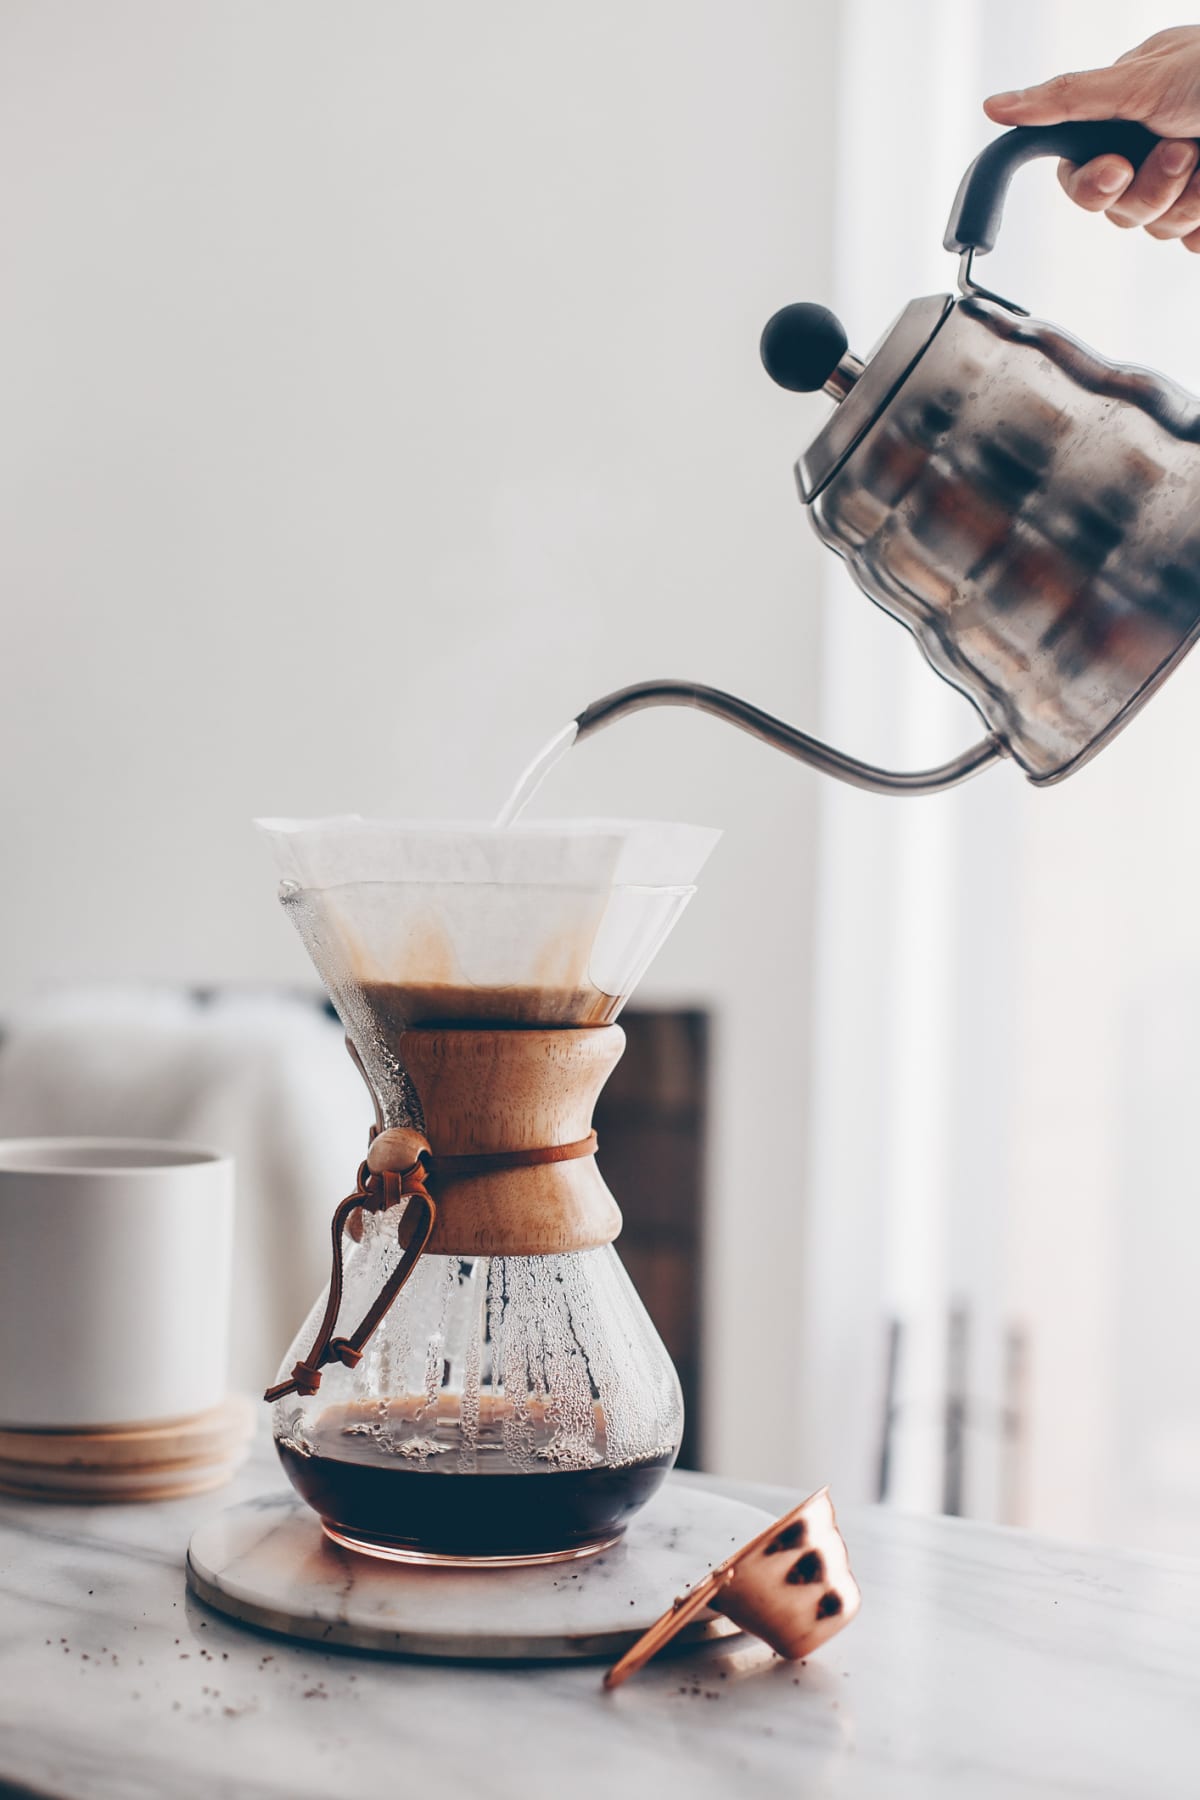 Pouring water into Chemex coffeemaker